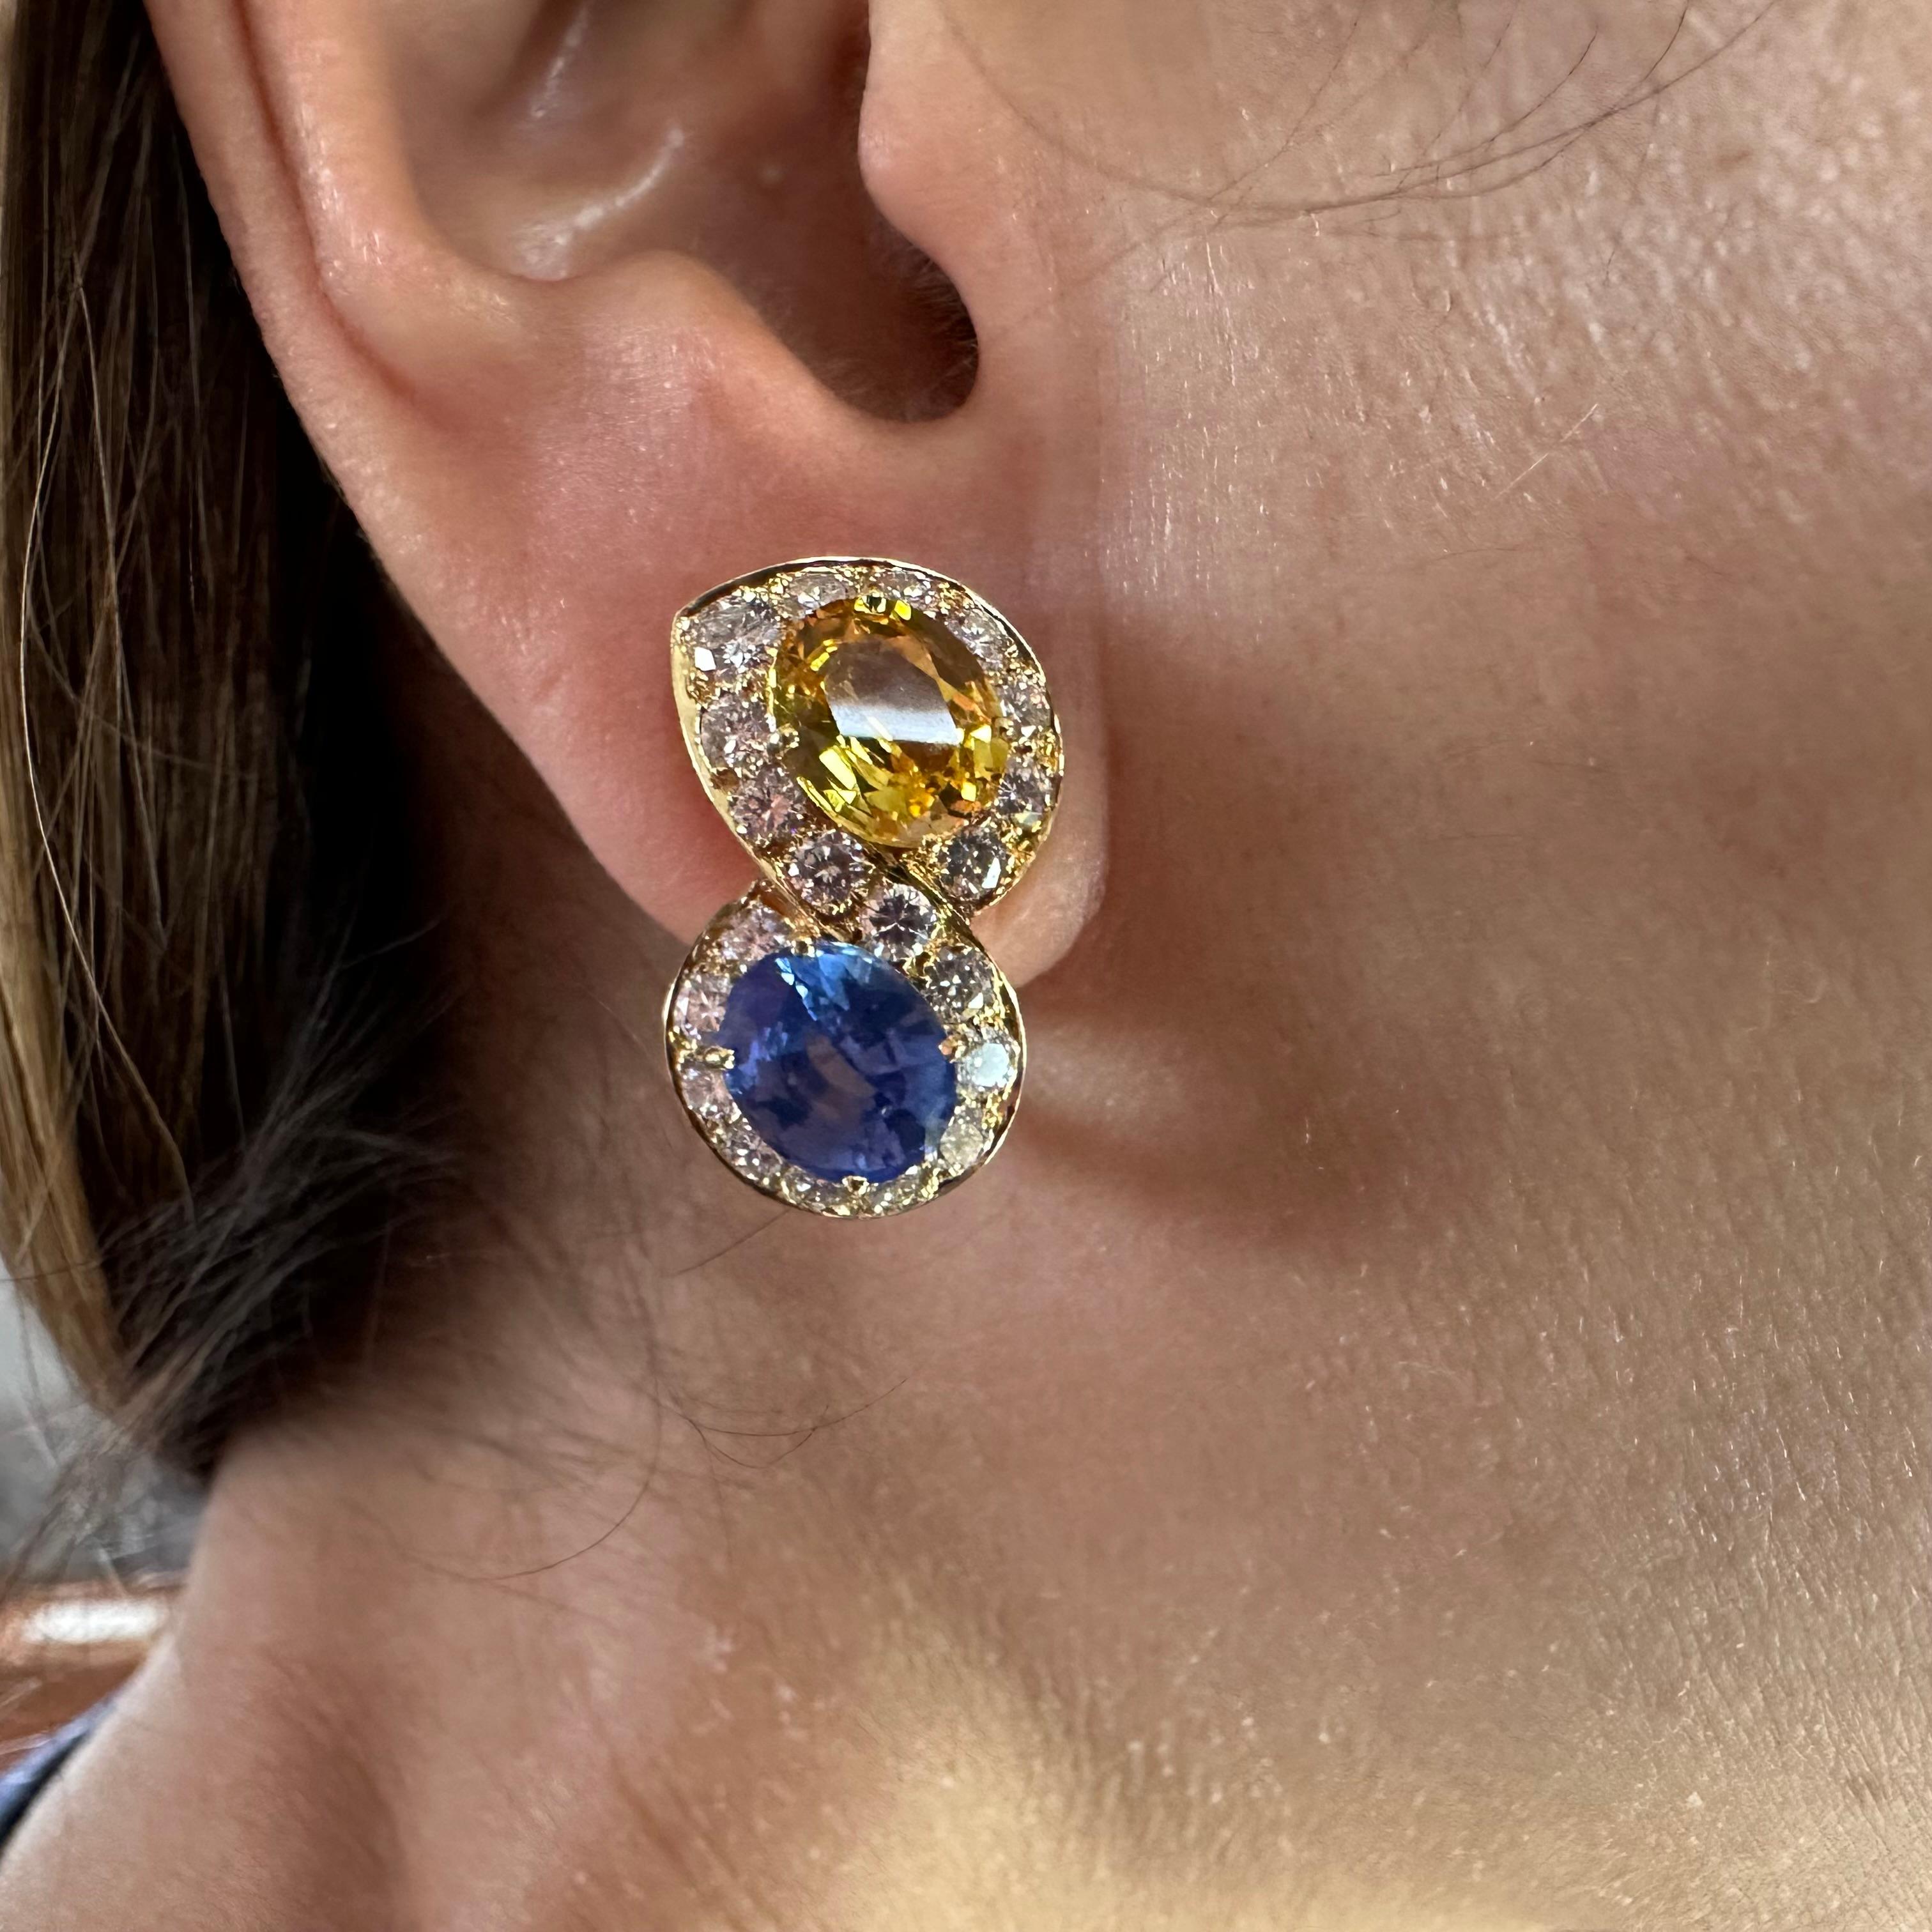 Van Cleef & Arpels  Sapphire & Diamond Earrings 18k Yellow Gold  In Excellent Condition For Sale In Beverly Hills, CA